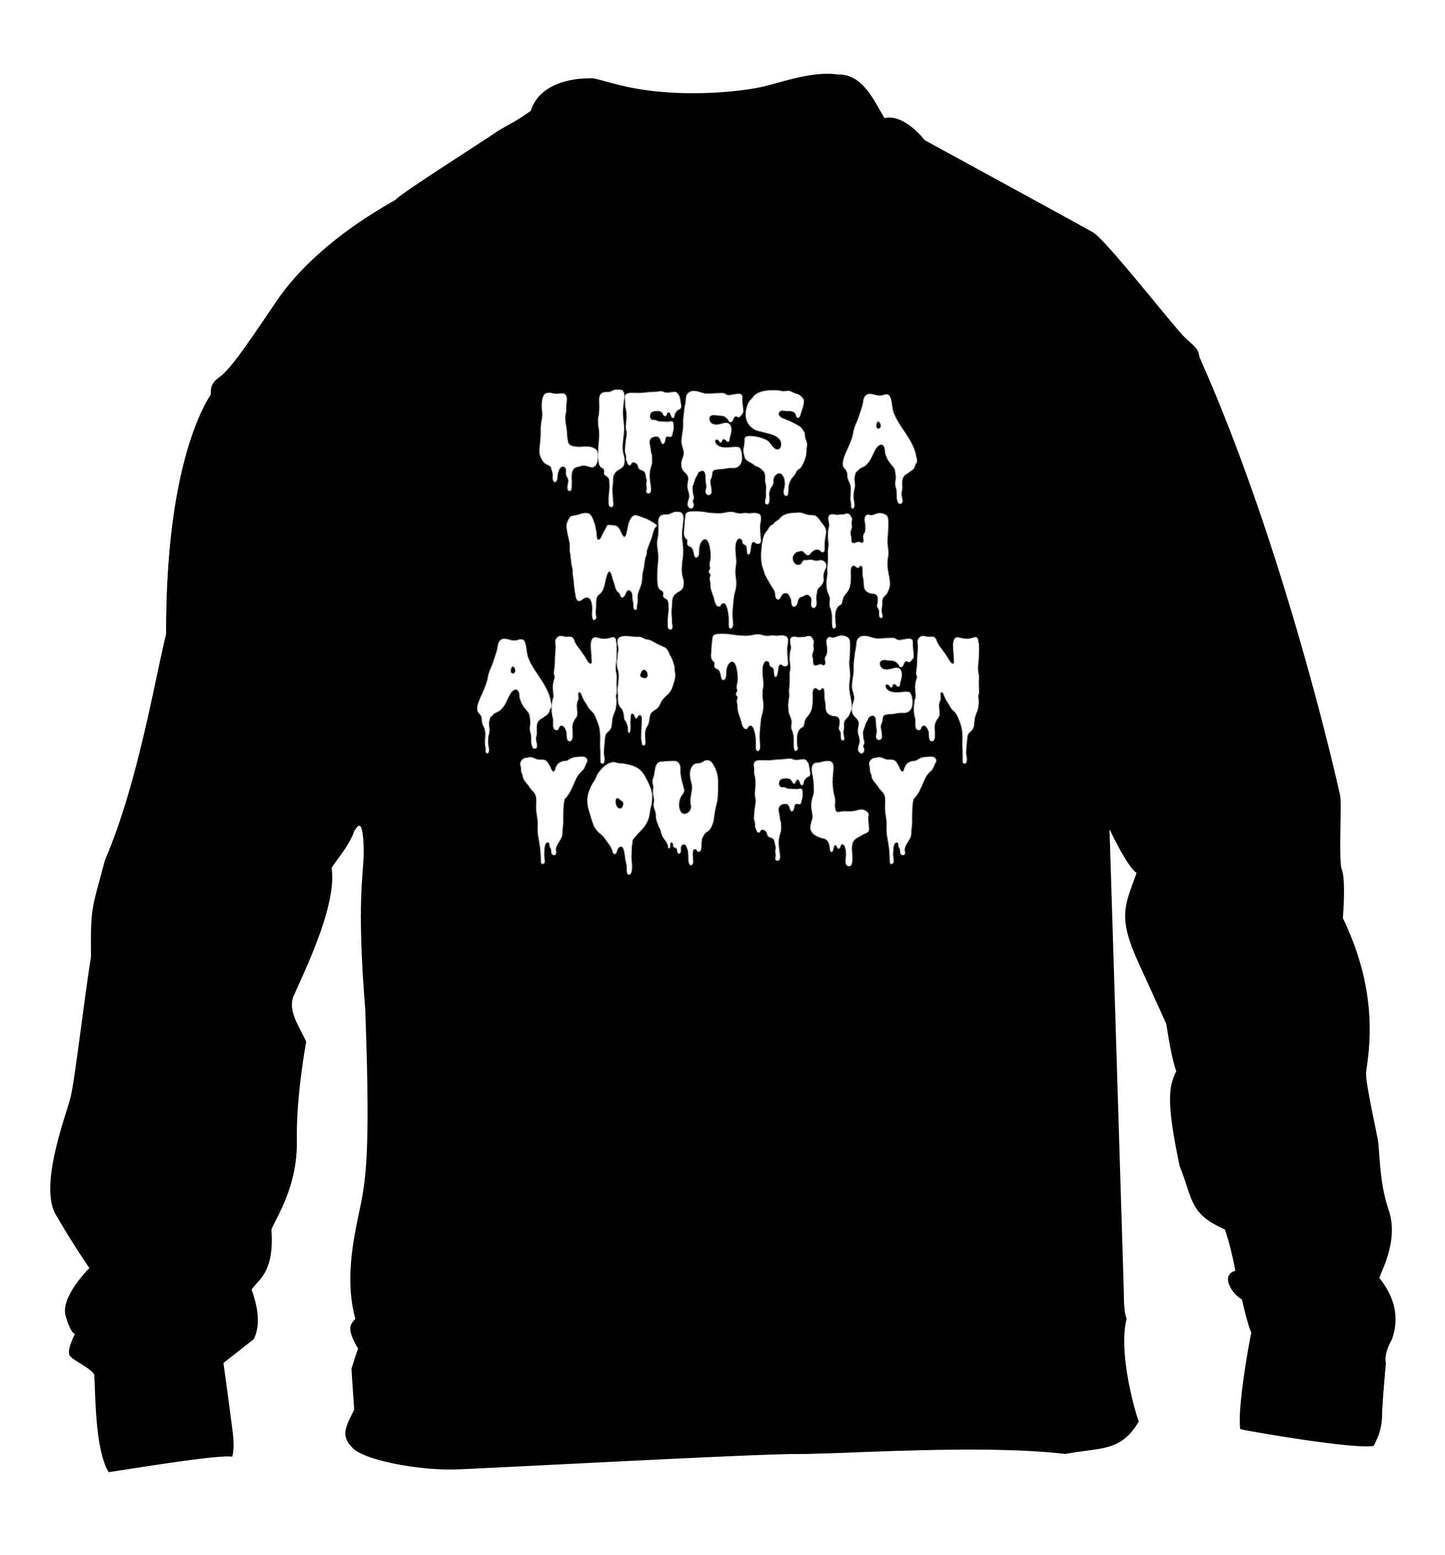 Life's a witch and then you fly children's black sweater 12-13 Years